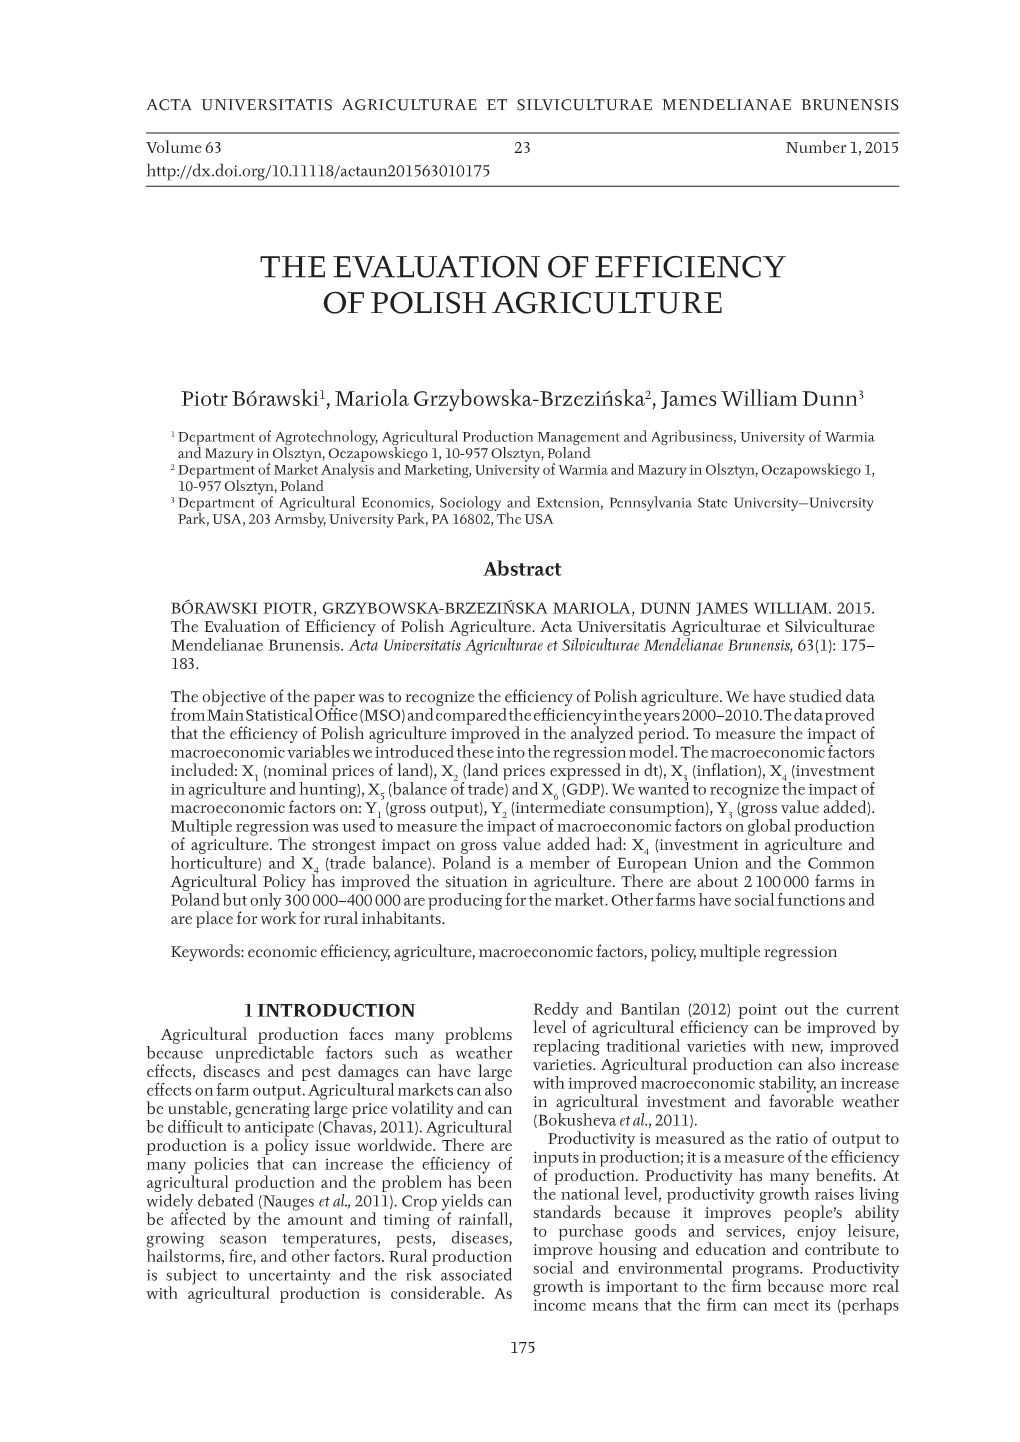 The Evaluation of Efficiency of Polish Agriculture